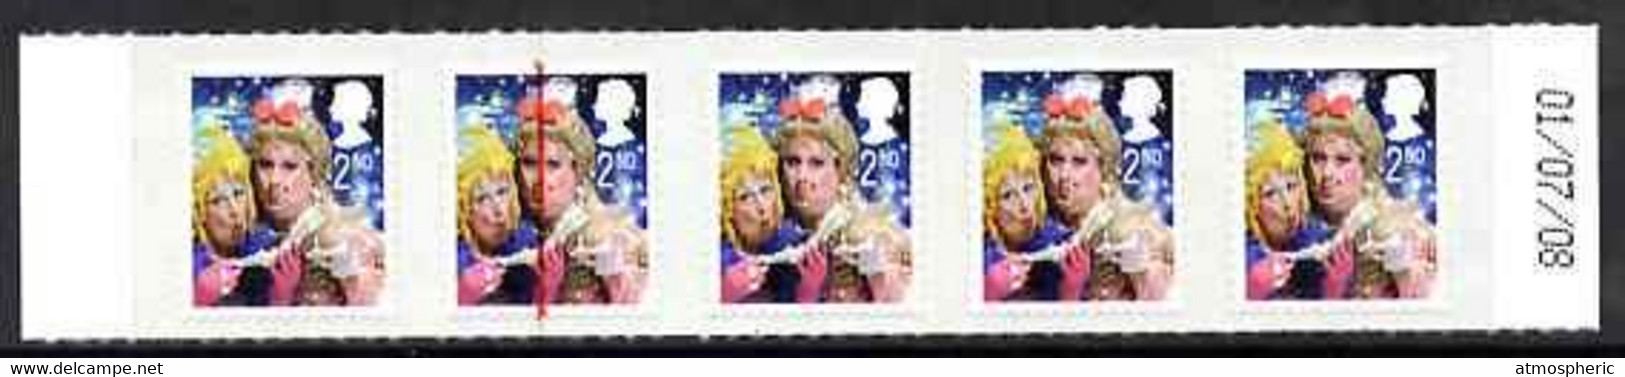 81456    GB 2008 Christmas 2nd Class Self Adhesive Strip Of 5 (Ugly Sisters) With Fine Doctor Blade Flaw - Errors, Freaks & Oddities (EFOs